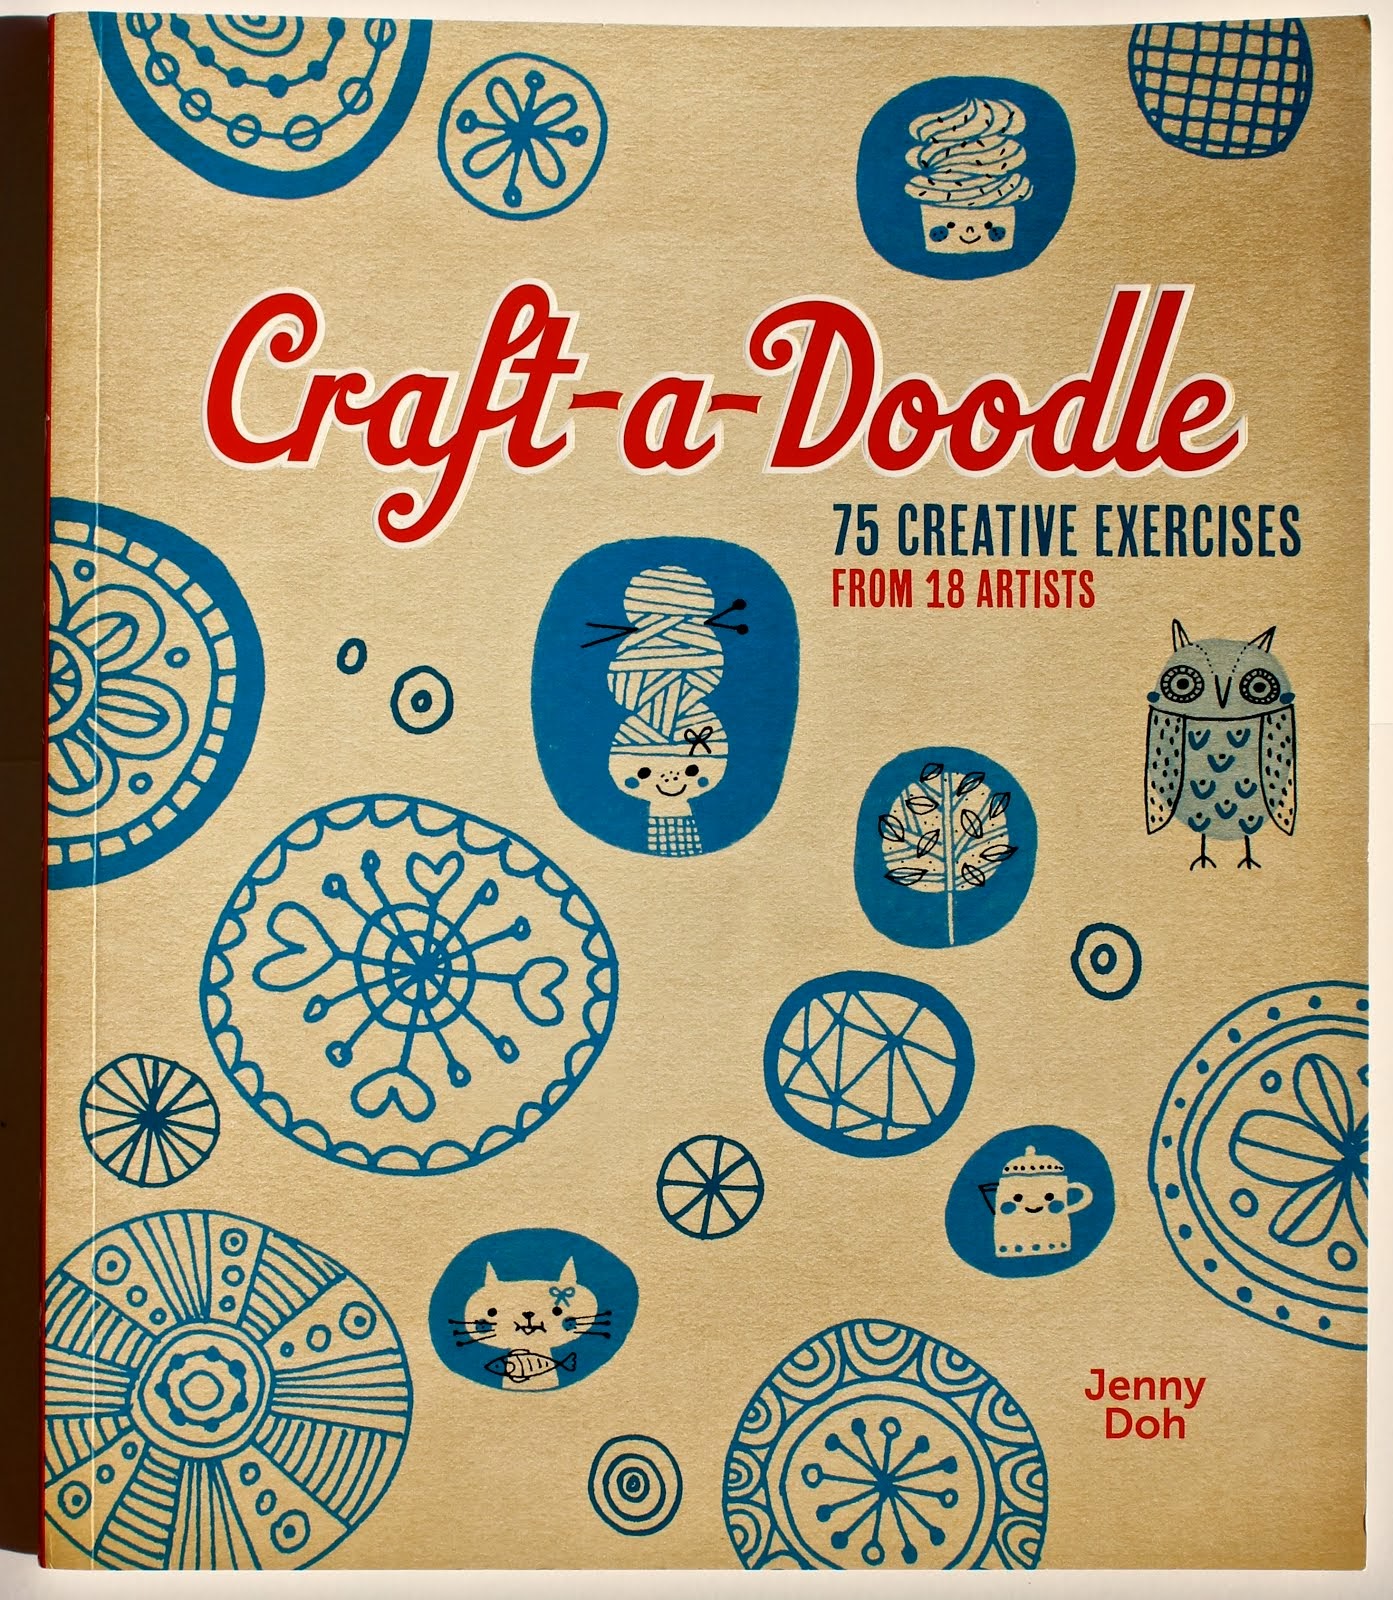 CONTRIBUTING ARTIST IN CRAFT-A-DOODLE, by JENNY DOH, AUGUST 2013